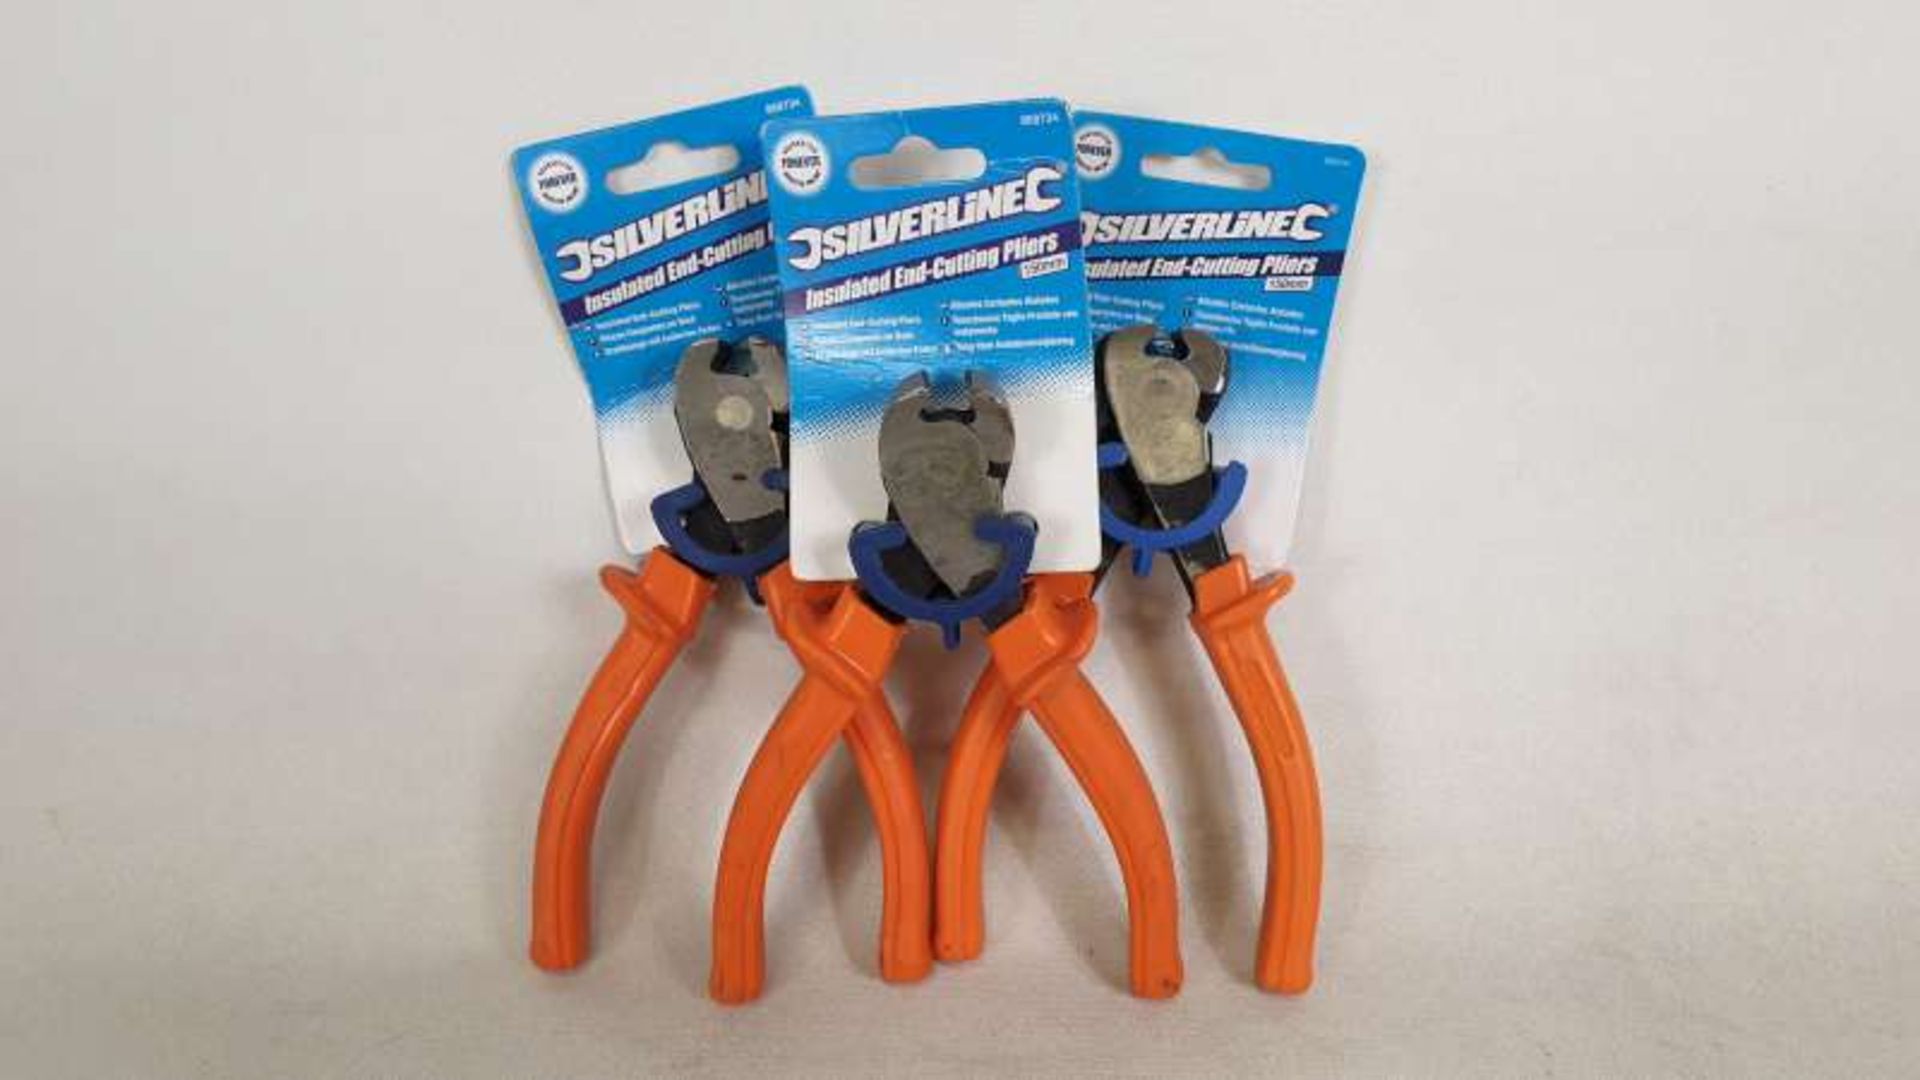 17 X SILVERLINE INSULATED END CUTTING PLIERS